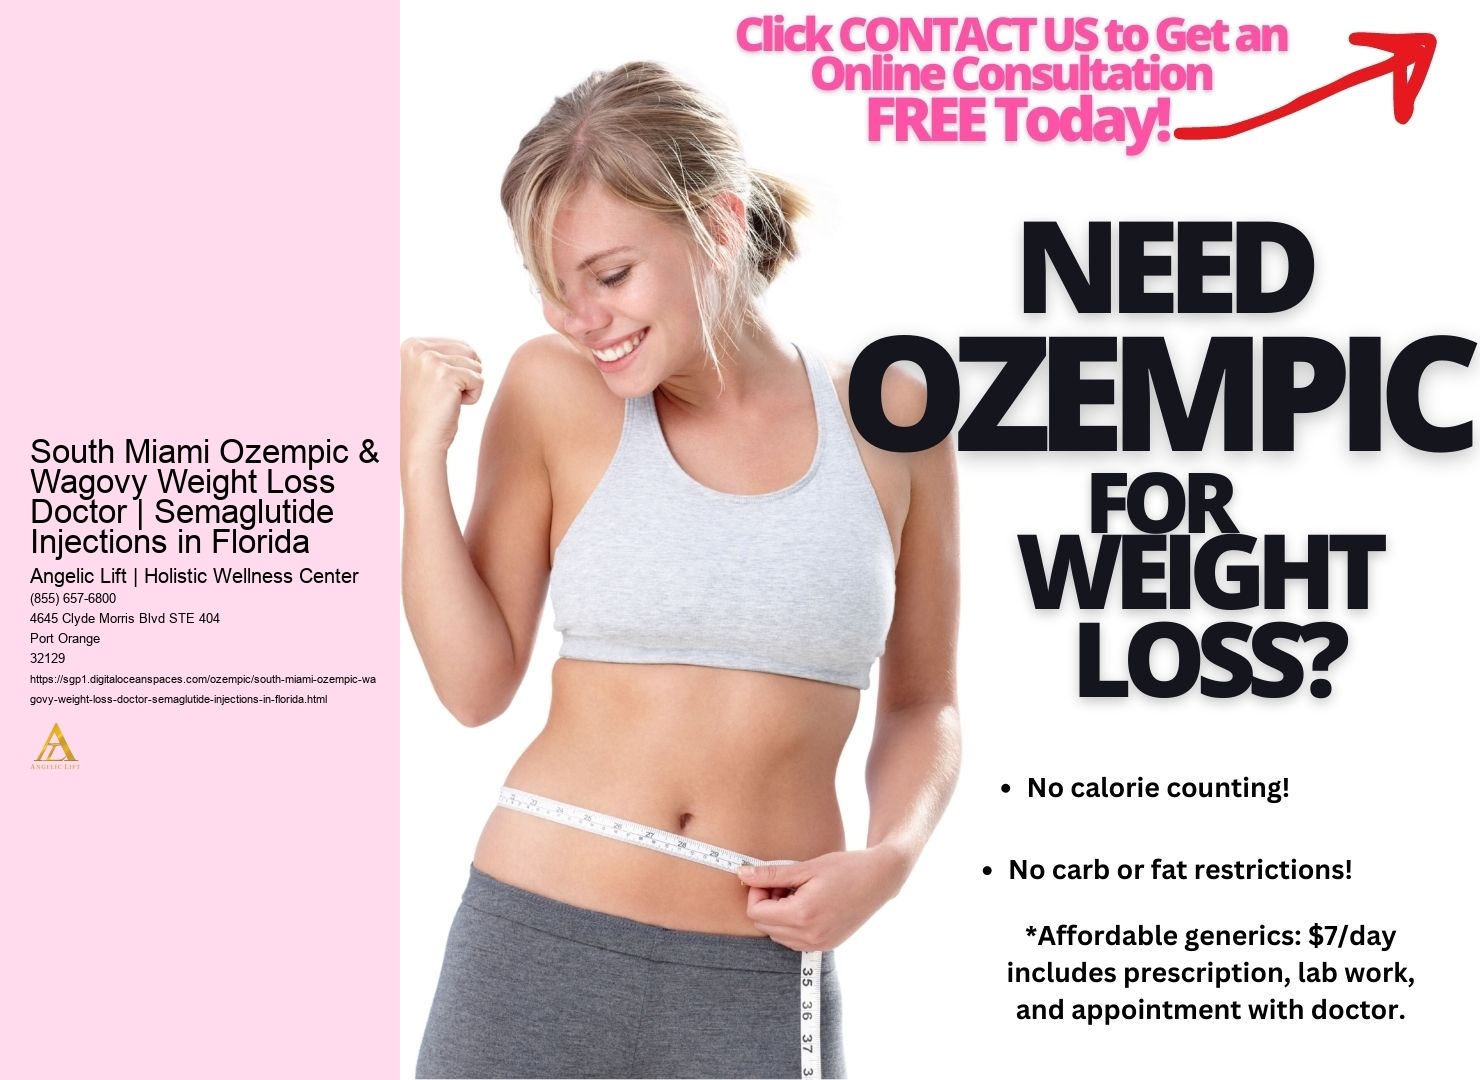 South Miami Ozempic & Wagovy Weight Loss Doctor | Semaglutide Injections in Florida